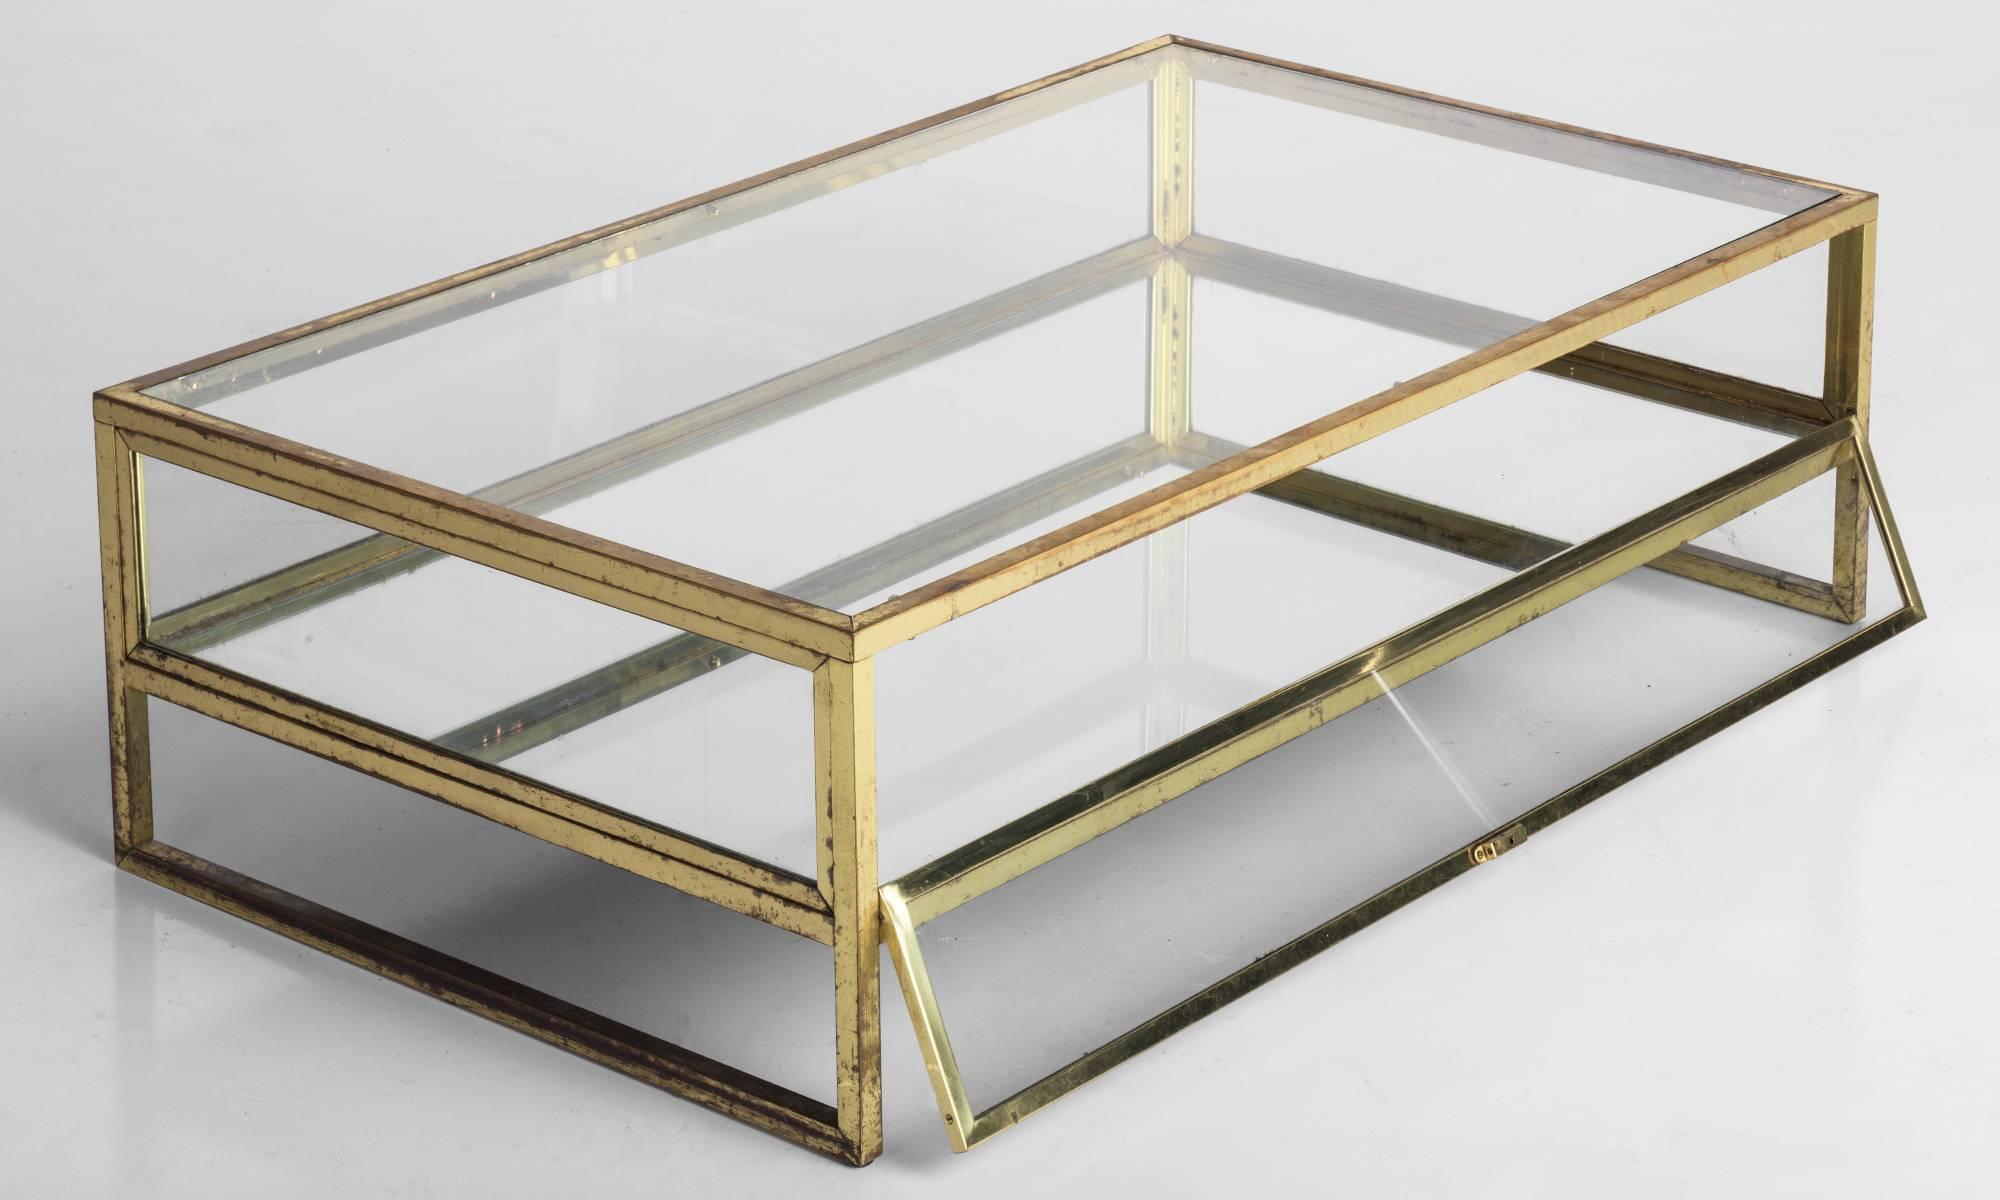 Brass and glass coffee table, circa 1970.

Elegant brass framework with internal compartment, featuring mirrored glass base.

Measures: 47" L x 27.5" D x 14" H.